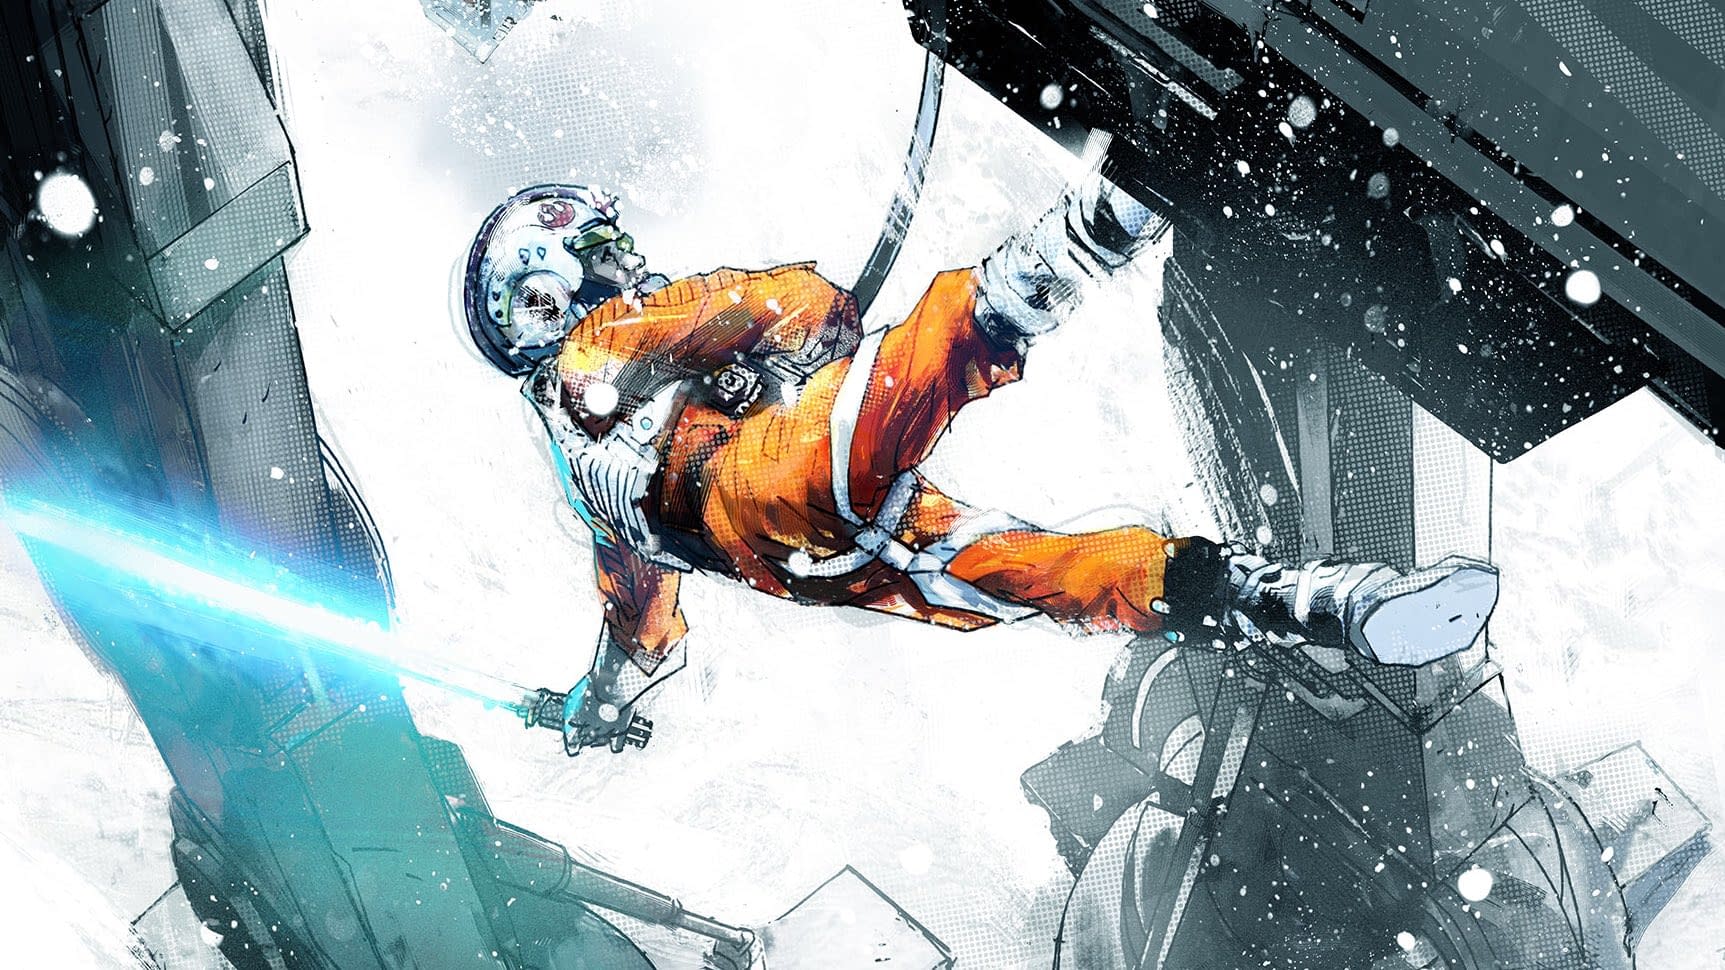 Jock Teases a New Star Wars Poster Depicting Iconic Empire Strikes Back Scene